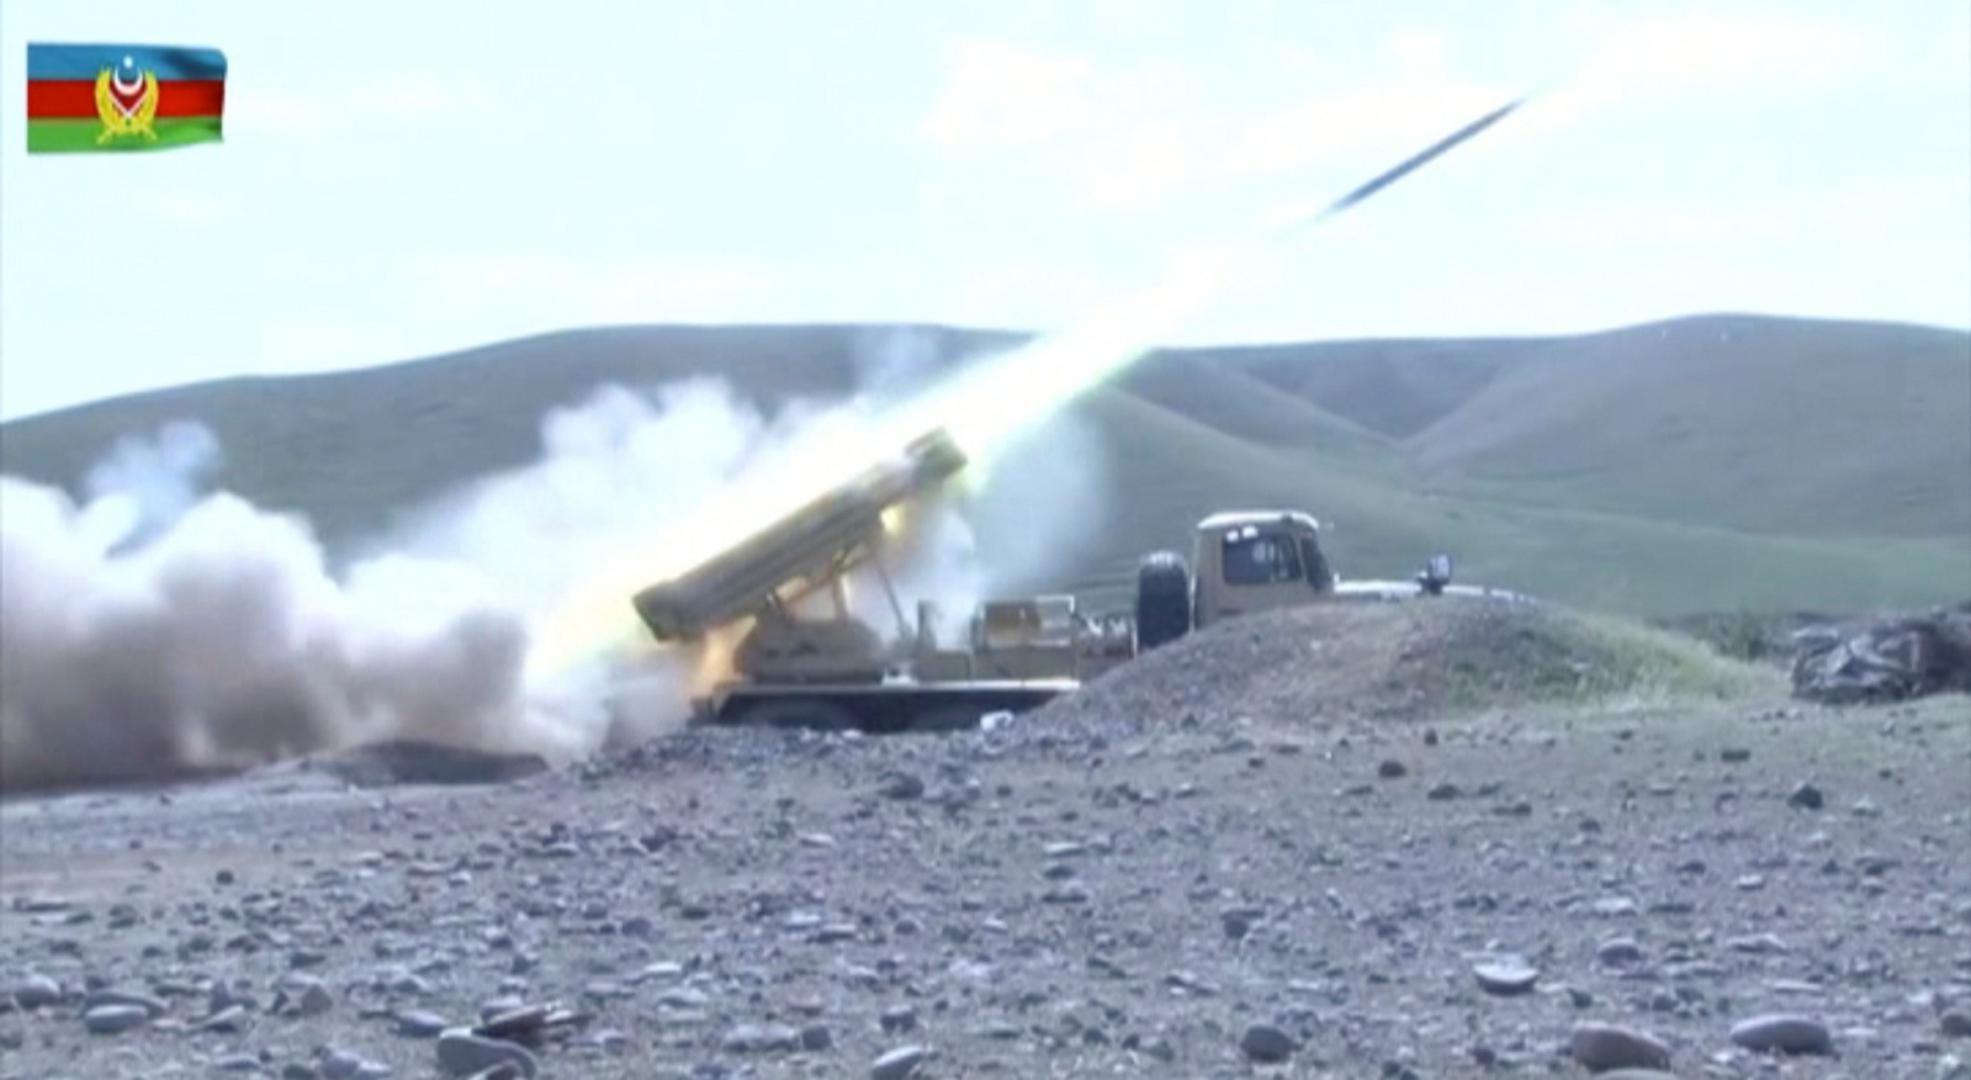 A still image shows an Azeri multiple rocket launcher performing strikes during clashes over the breakaway region of Nagorno-Karabakh A still image from a video released by Azerbaijan's Defence Ministry shows a multiple rocket launcher of the Azeri armed forces performing strikes during clashes over the breakaway region of Nagorno-Karabakh in an unknown location in Azerbaijan, in this still image from footage released September 30, 2020. Defence Ministry of Azerbaijan/Handout via REUTERS  ATTENTION EDITORS - THIS IMAGE HAS BEEN SUPPLIED BY A THIRD PARTY. NO RESALES. NO ARCHIVES. MANDATORY CREDIT. DEFENCE MINISTRY OF AZERBAIJAN